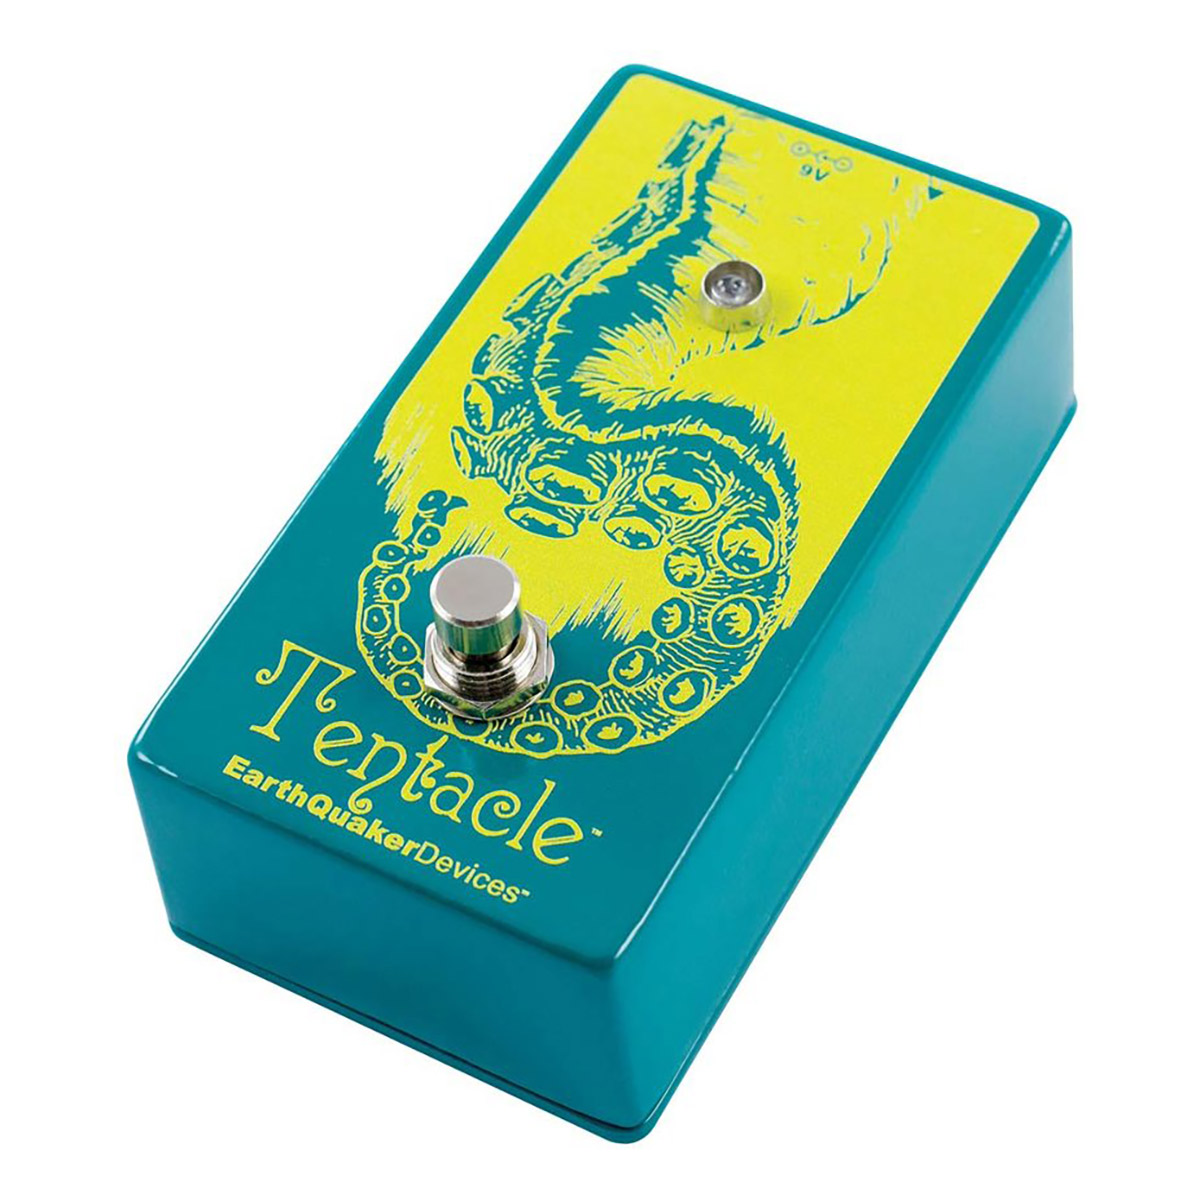 Earth Quaker Devices Tentacle オクターバー